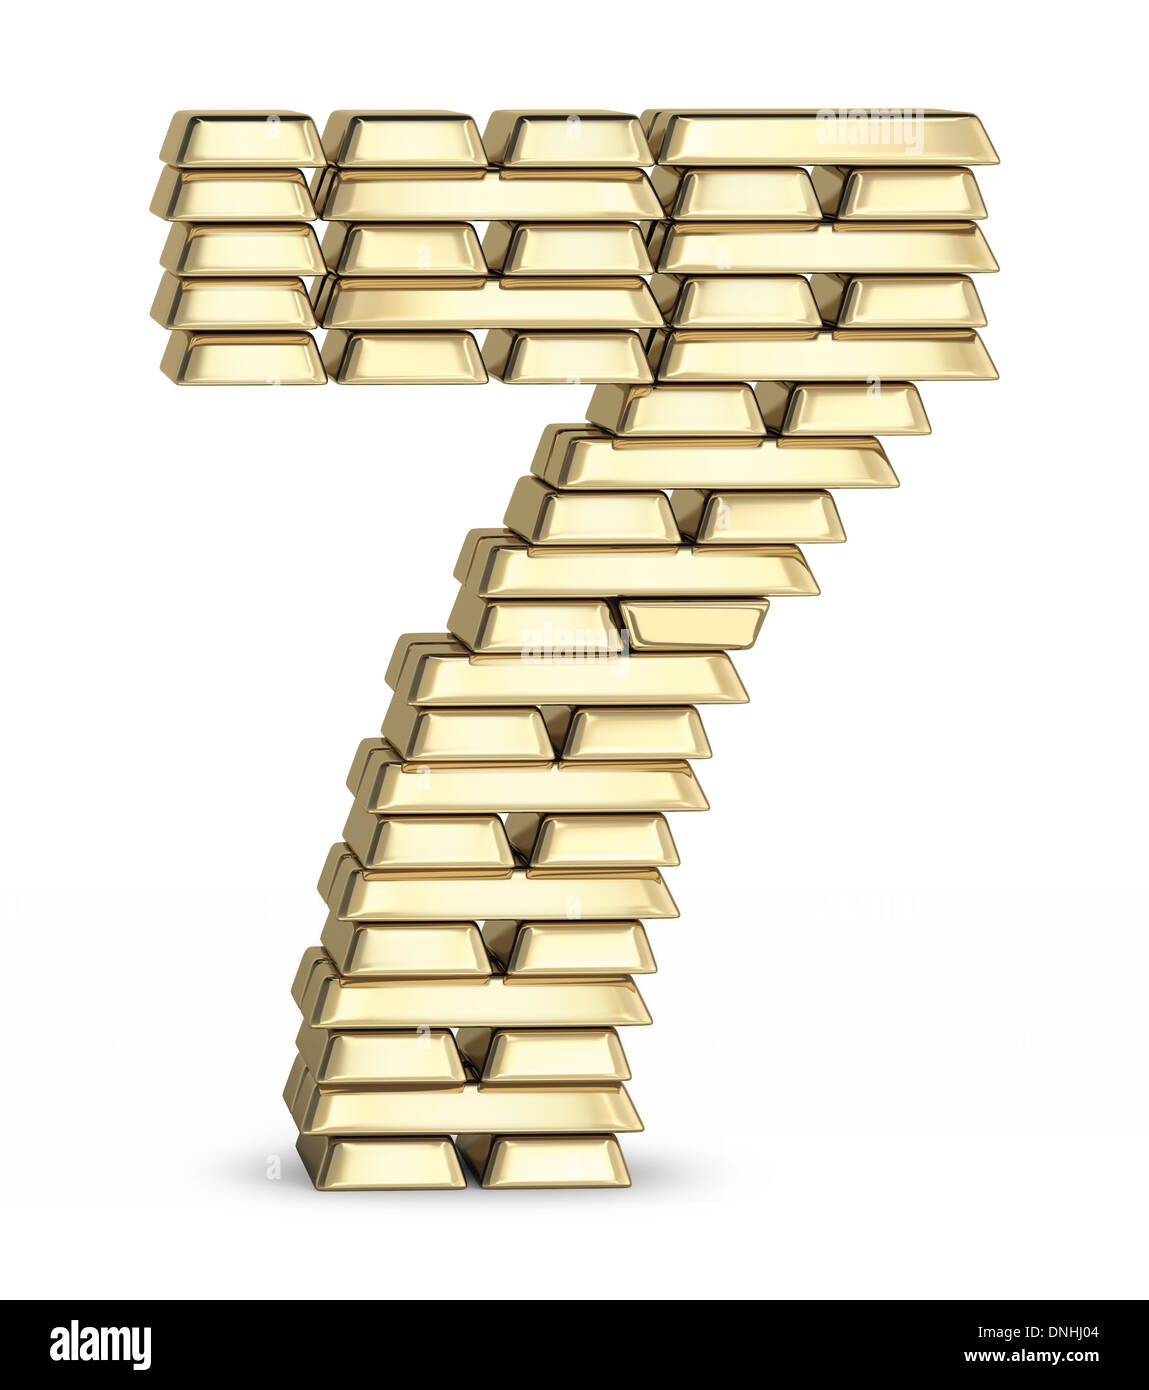 Number 7 from gold bars Stock Photo